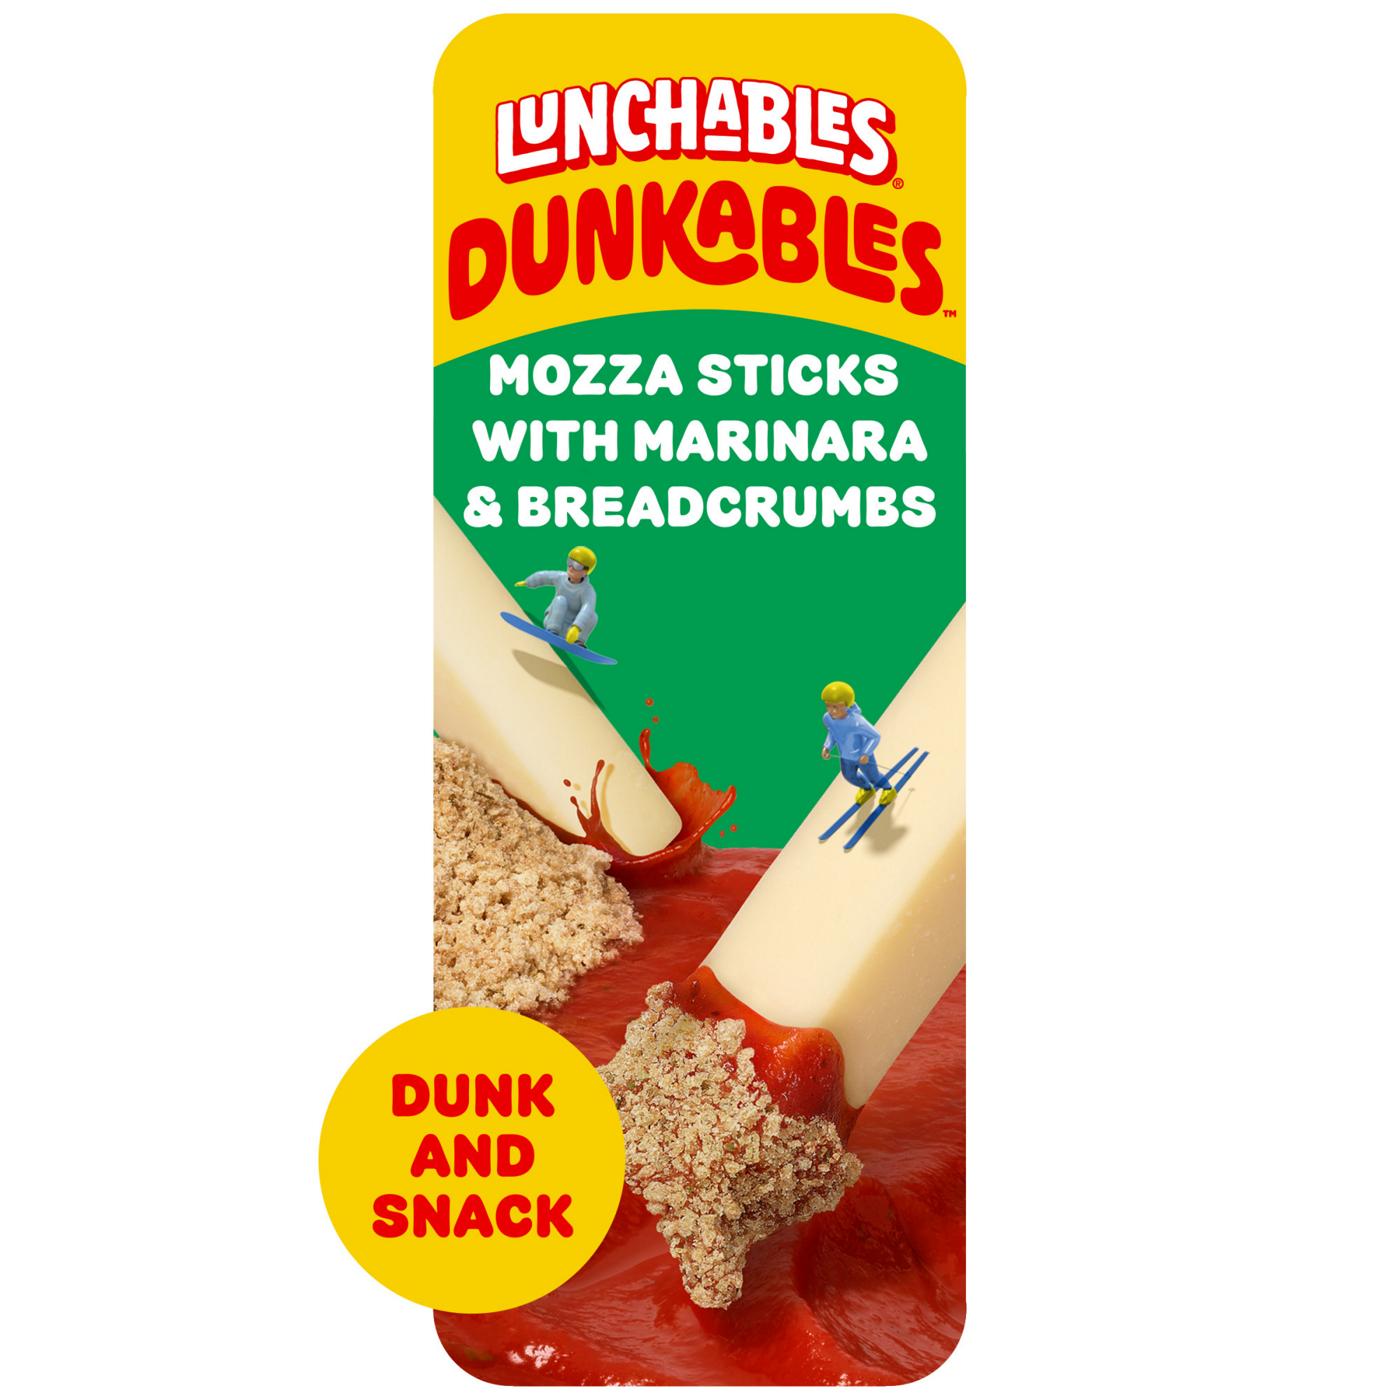 Lunchables Dunkables Snack Kit Tray - Mozza Sticks with Marinara & Breadcrumbs; image 2 of 8